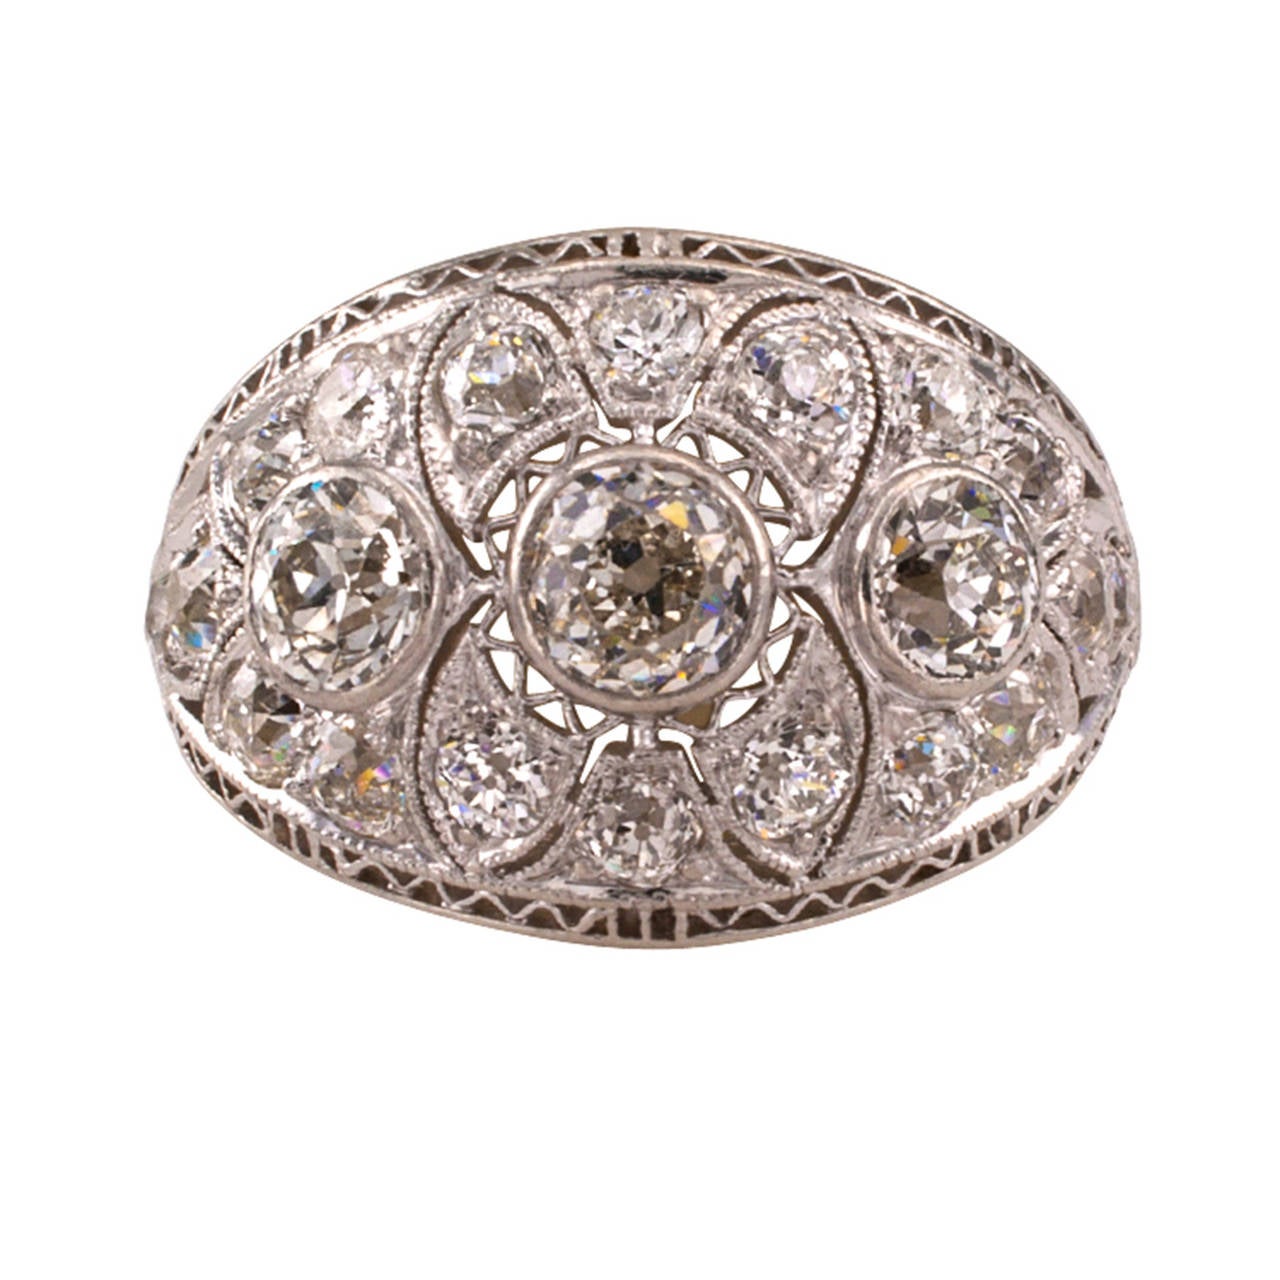 Edwardian Diamond Saddle Ring Band

The slightly domed design lays across the finger like a fine tapestry of diamonds and delicate filigree work, like a small slice off of The Milky Way to admire and enjoy right on your finger, glittering and